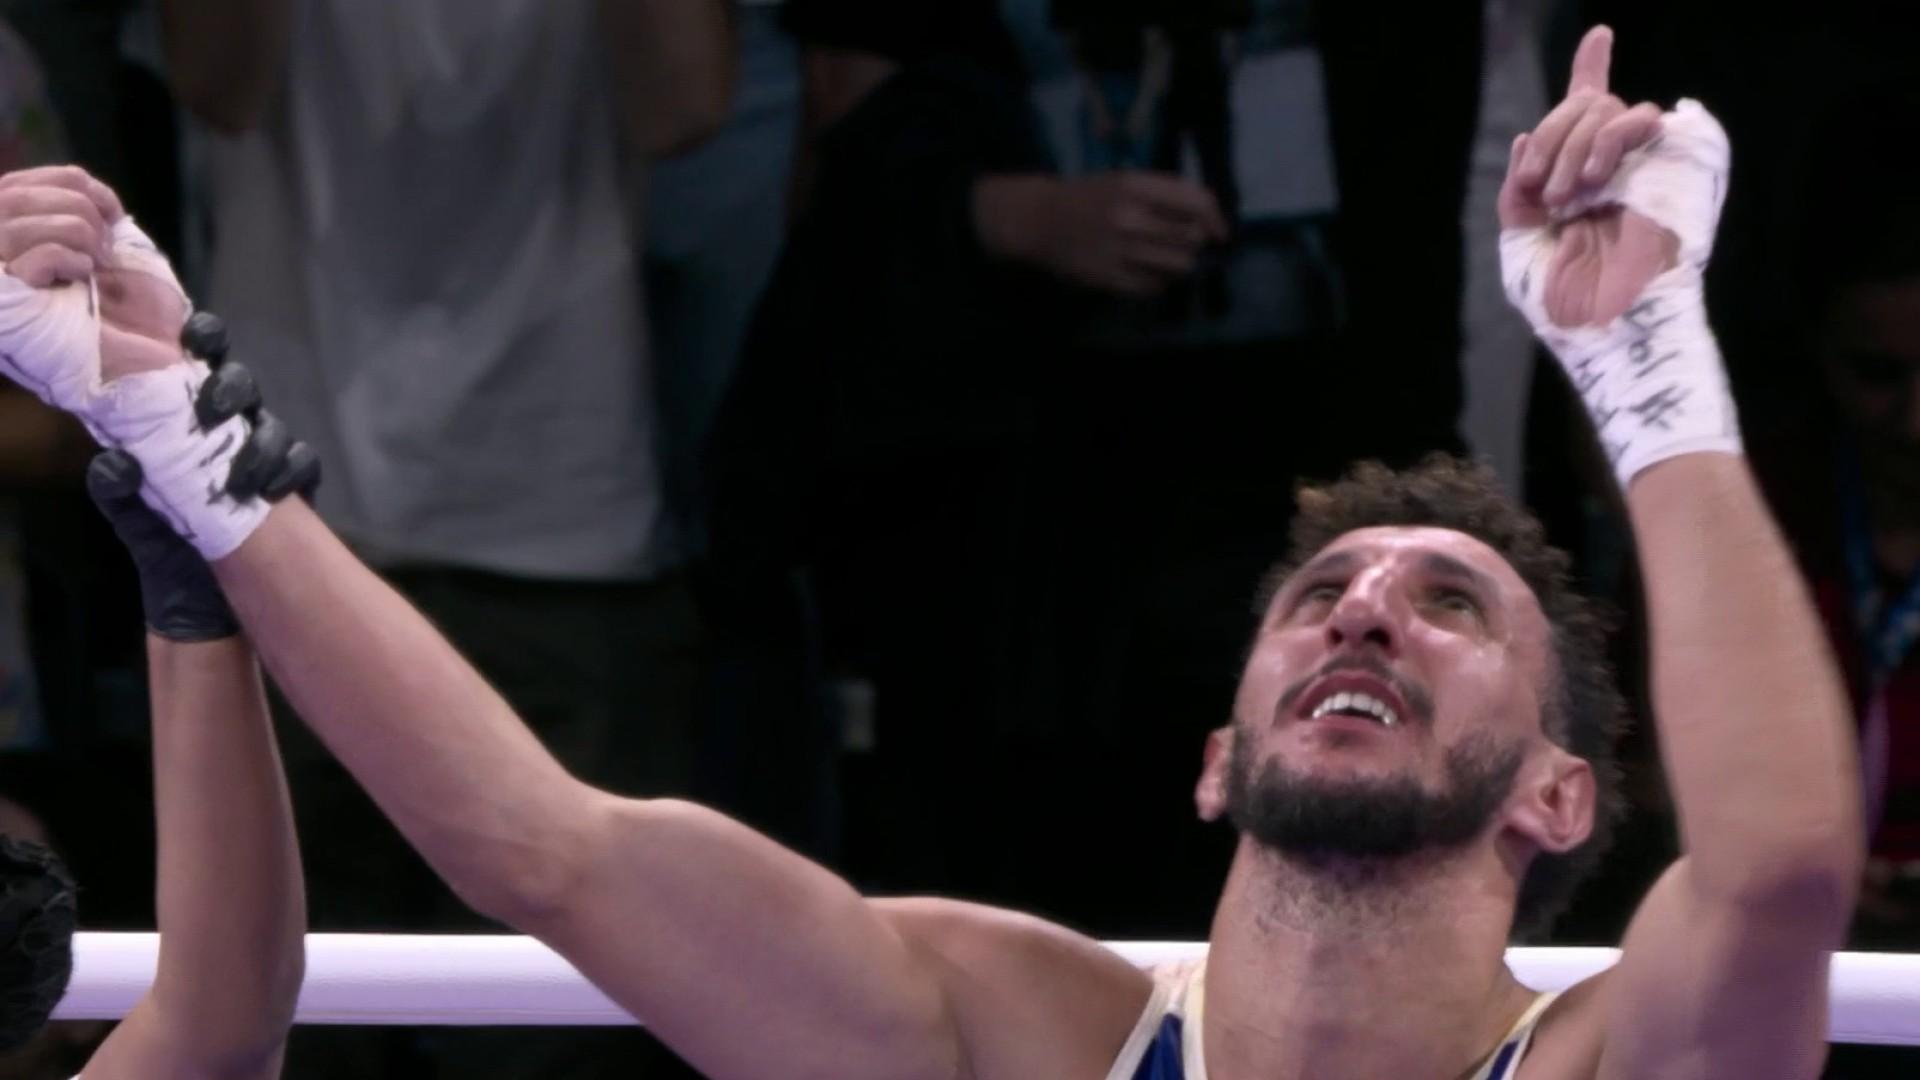 Sofiane Oumiha qualified for the Olympic boxing final in the under 63.5 kg category by beating Canadian Wyatt Sanford.